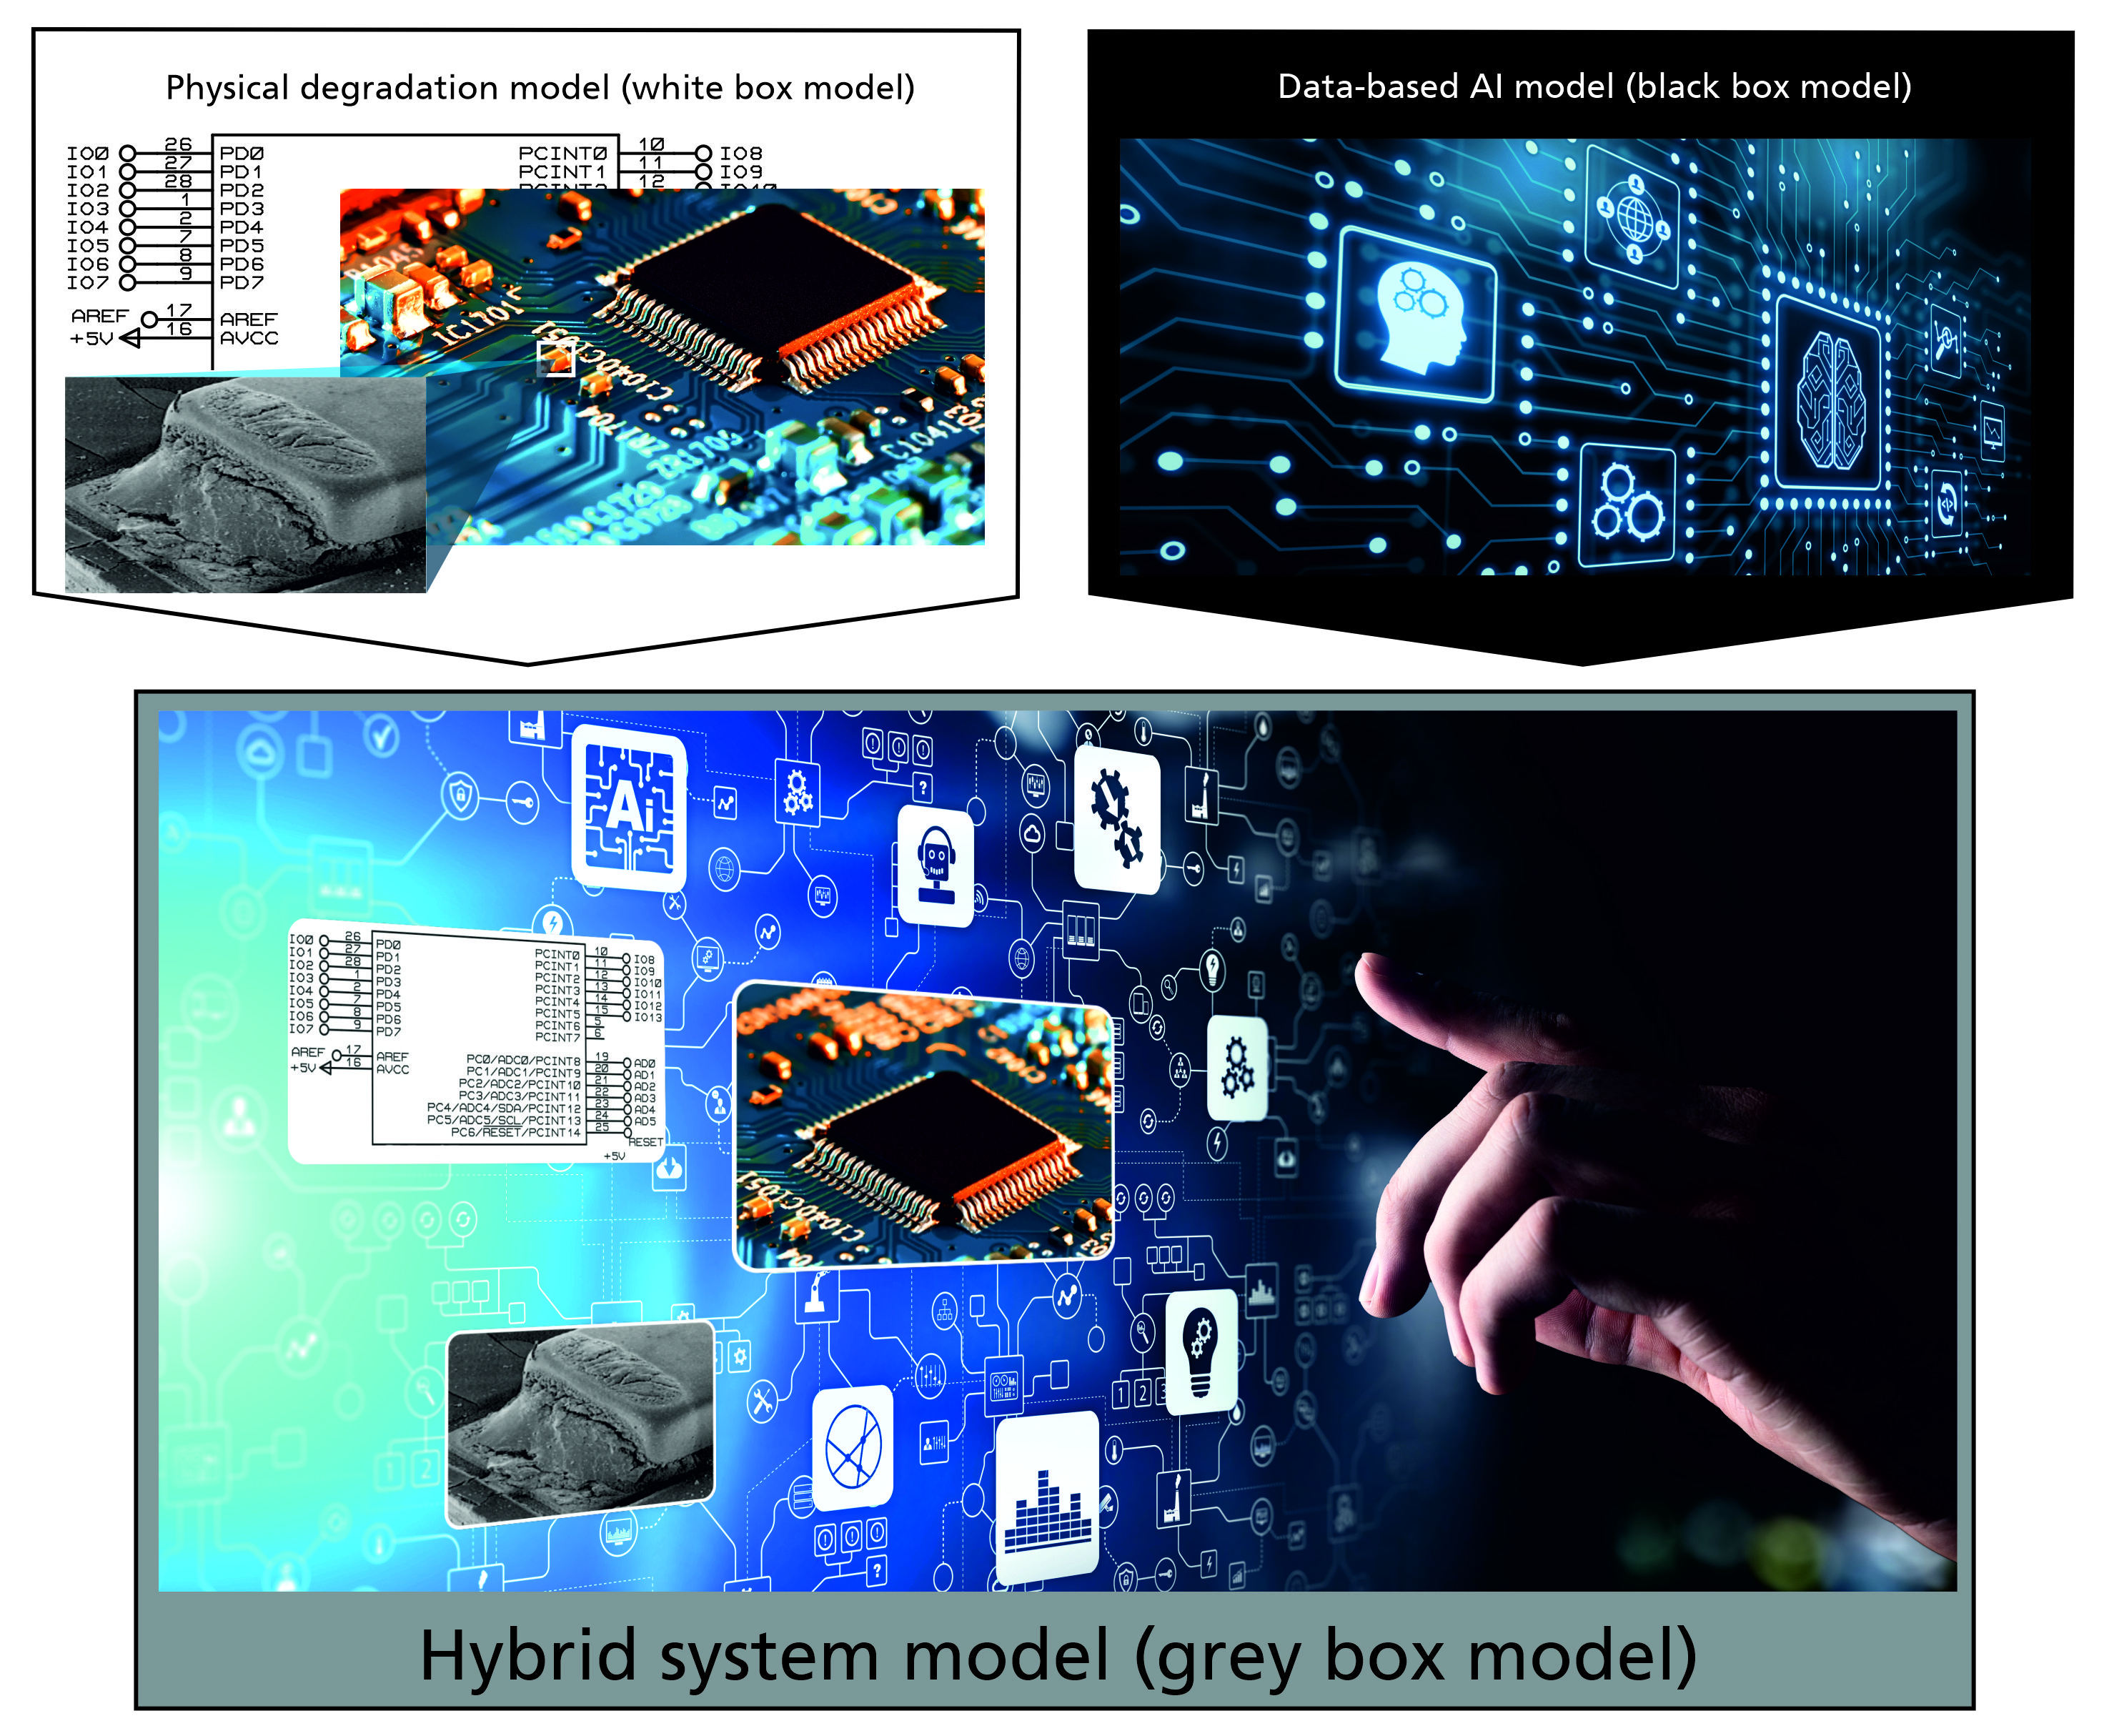 Hybrid models combine the advantages of both physical and data-driven models.